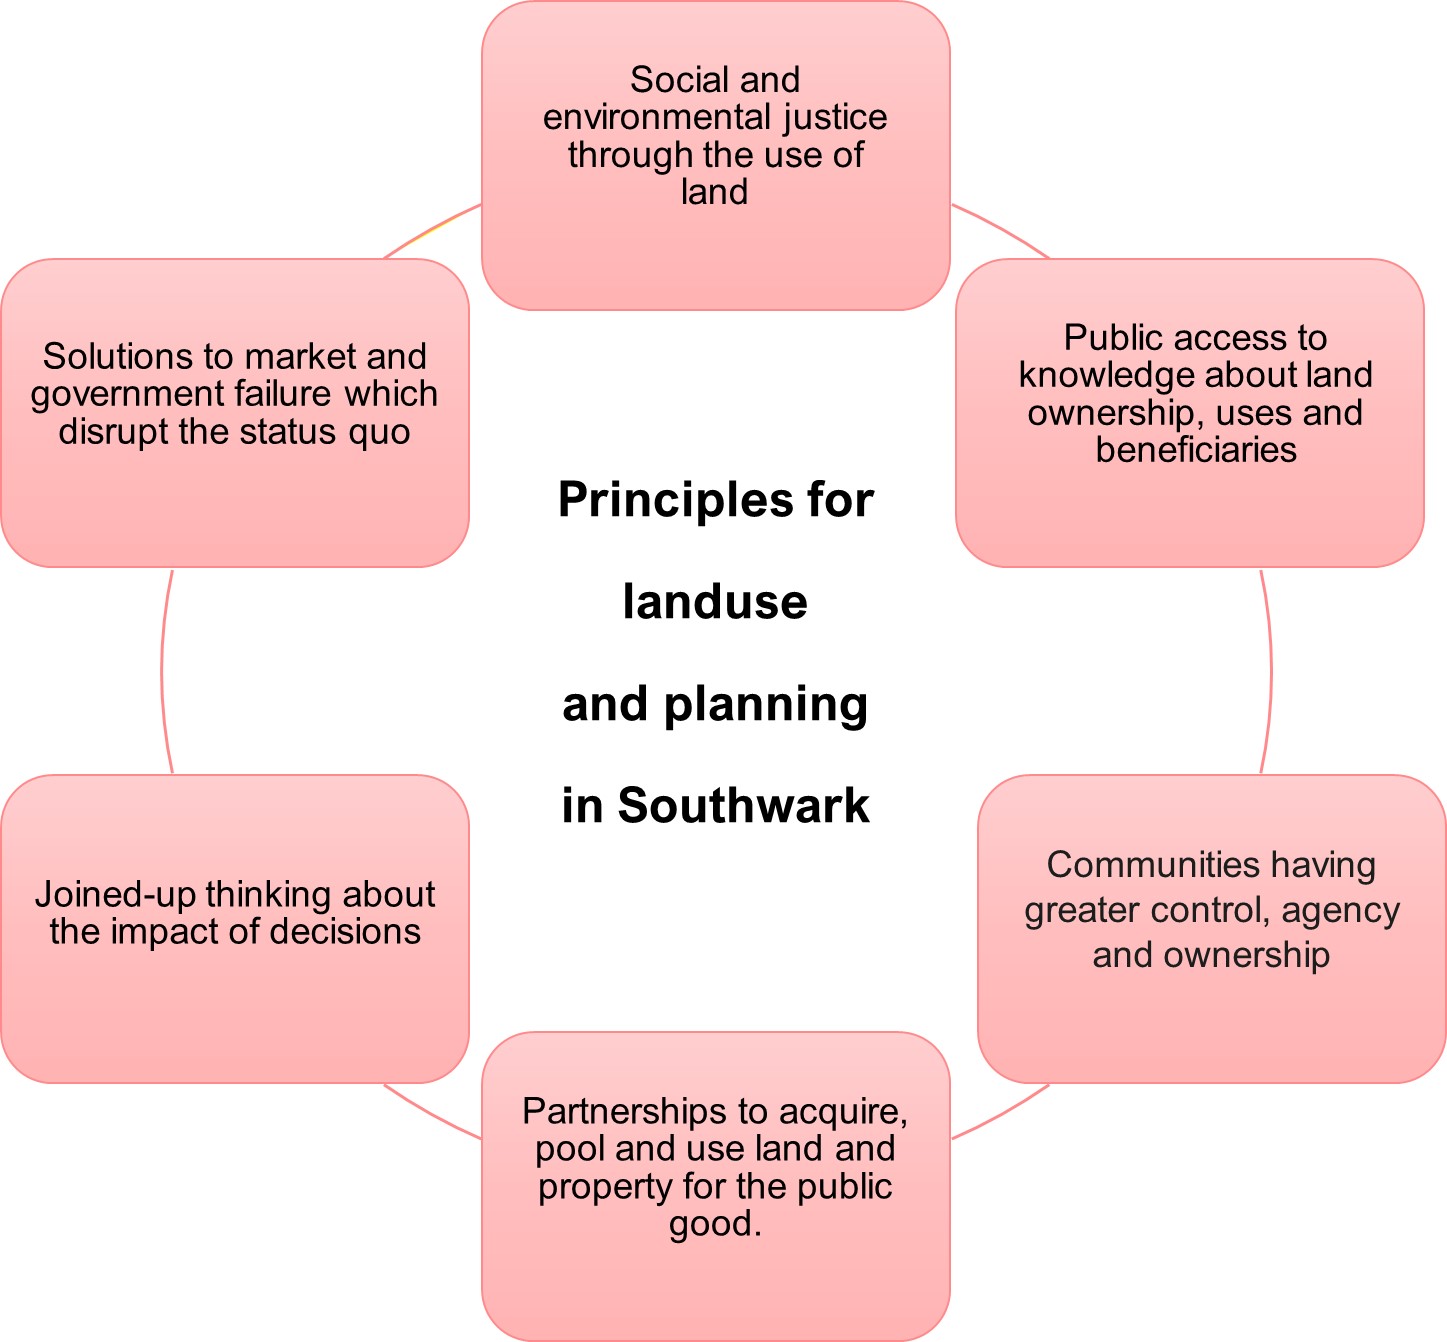 A diagram showing six principles of land use planning as the following: Social and environmental justice through the use of land, Public access to knowledge about land ownership, uses and beneficiaries, Communities having greater local control, agency and ownership, Partnerships to acquire, pool and use land and property for the public good, Joined-up thinking about the impact of decisions, Solutions to market and government failure which disrupt the status quo